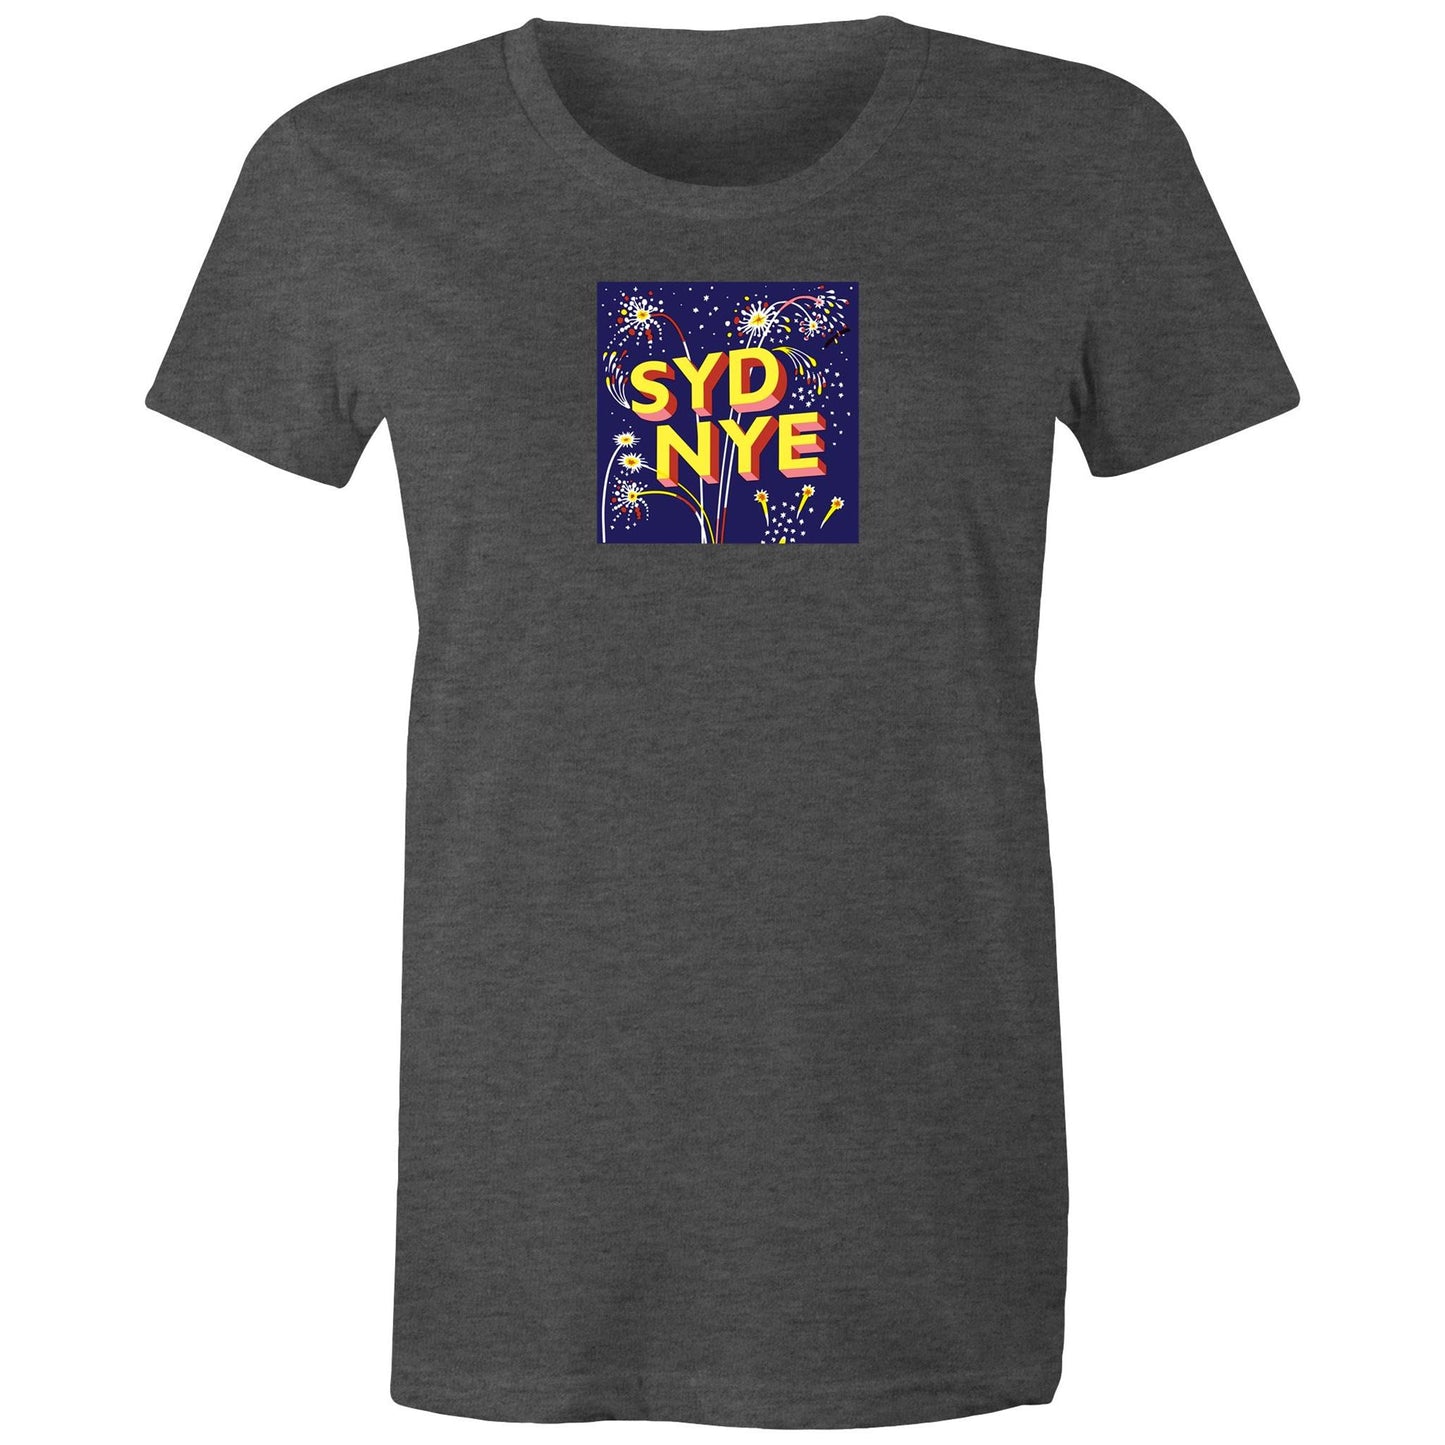 SYD NYE T Shirts for Women